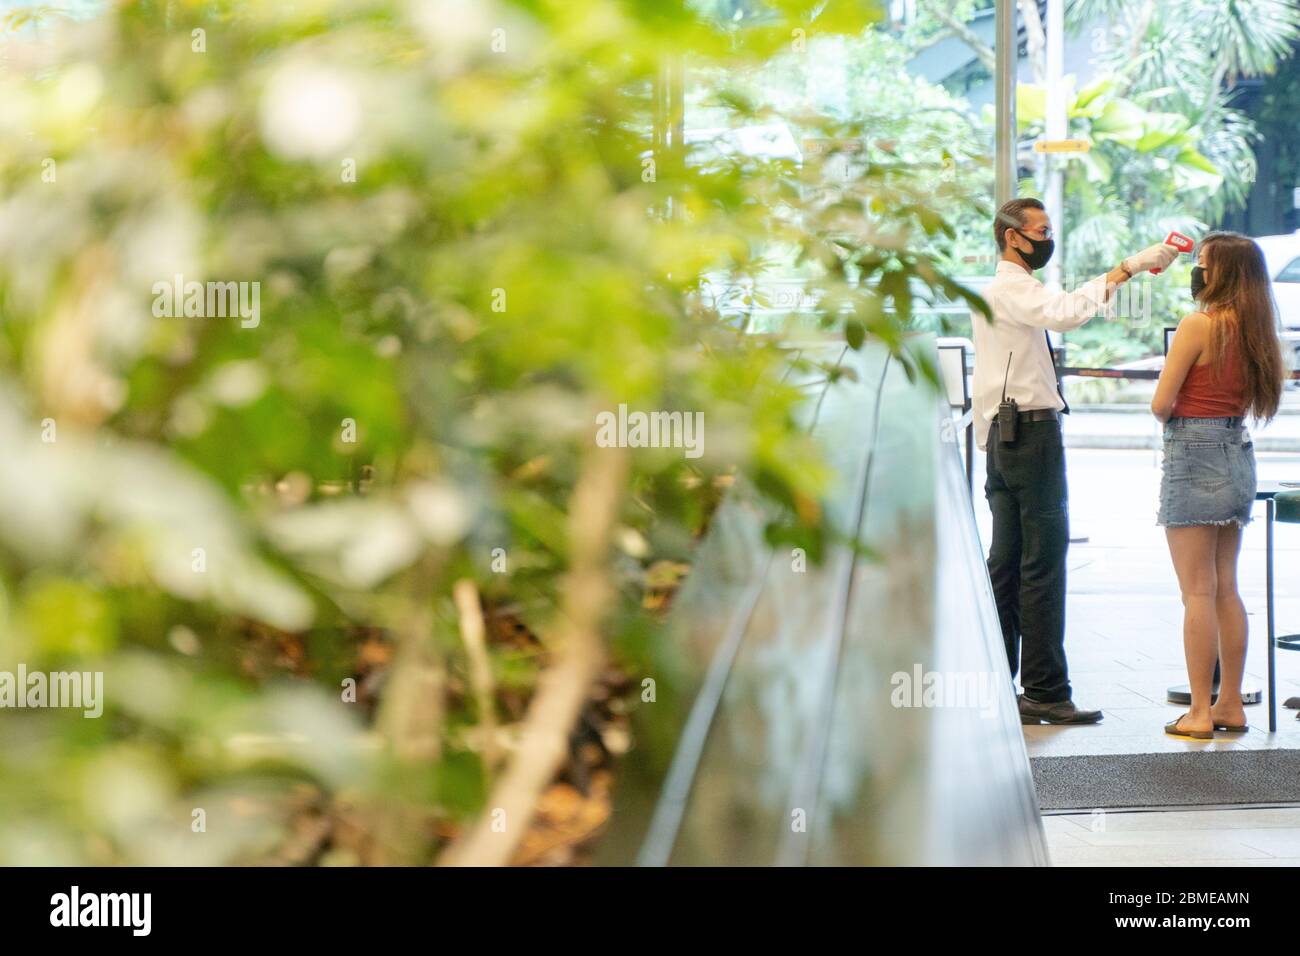 Security guard taking temperature of individual entering shopping mall Stock Photo